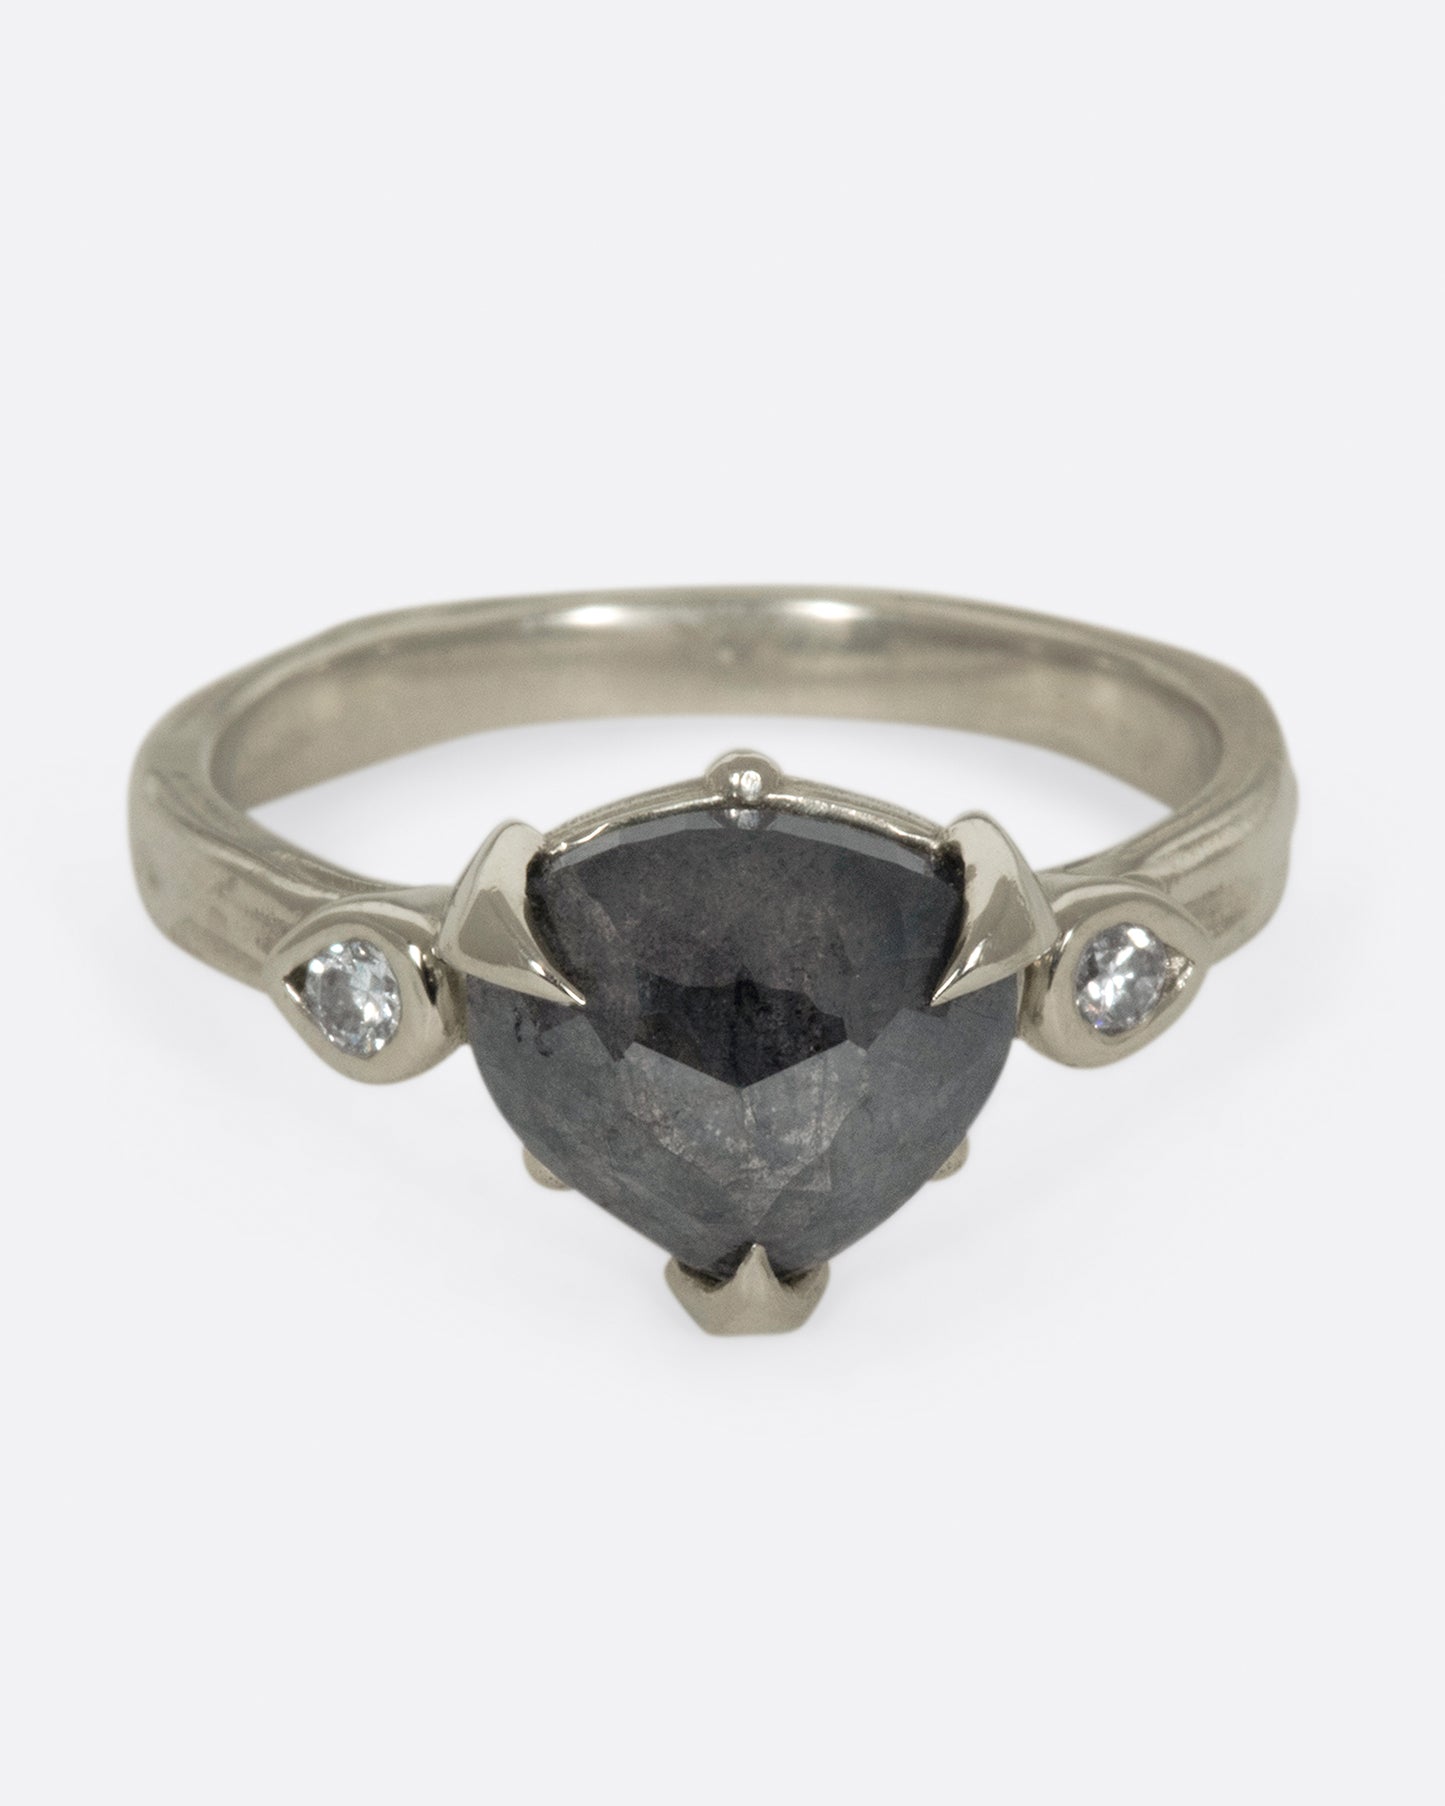 A dark, glamorous ring with a rose cut, heart-shaped diamond embraced in pointed claw settings.